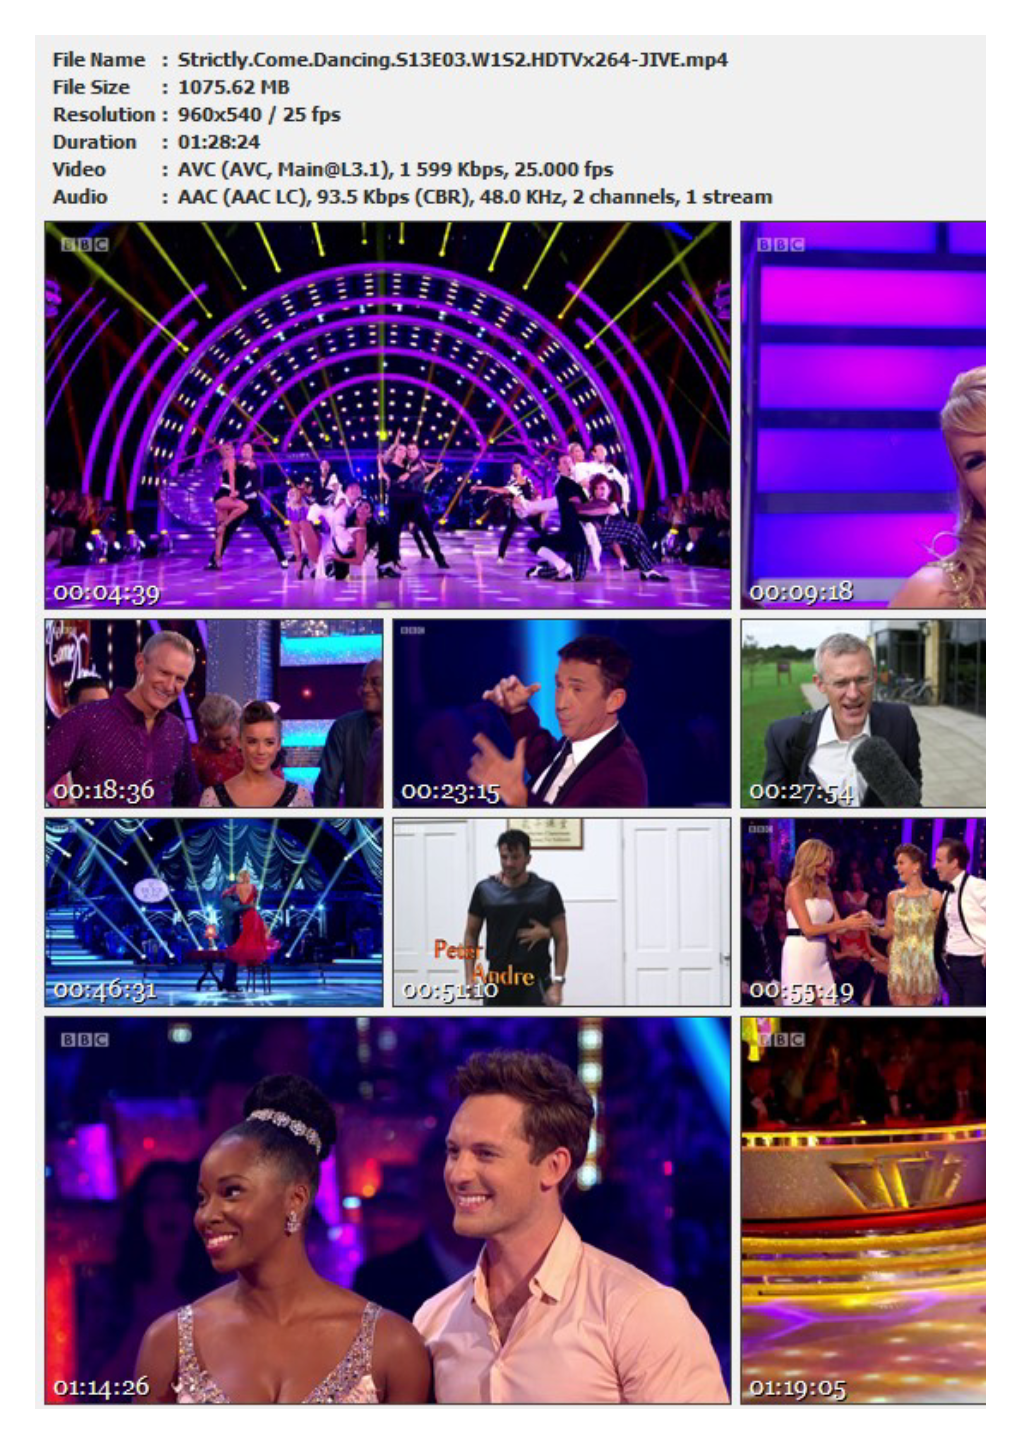 Strictly Come Dancing S13E03 W1S2 Hdtvx264-JIVE Torrent in Series / TV Show